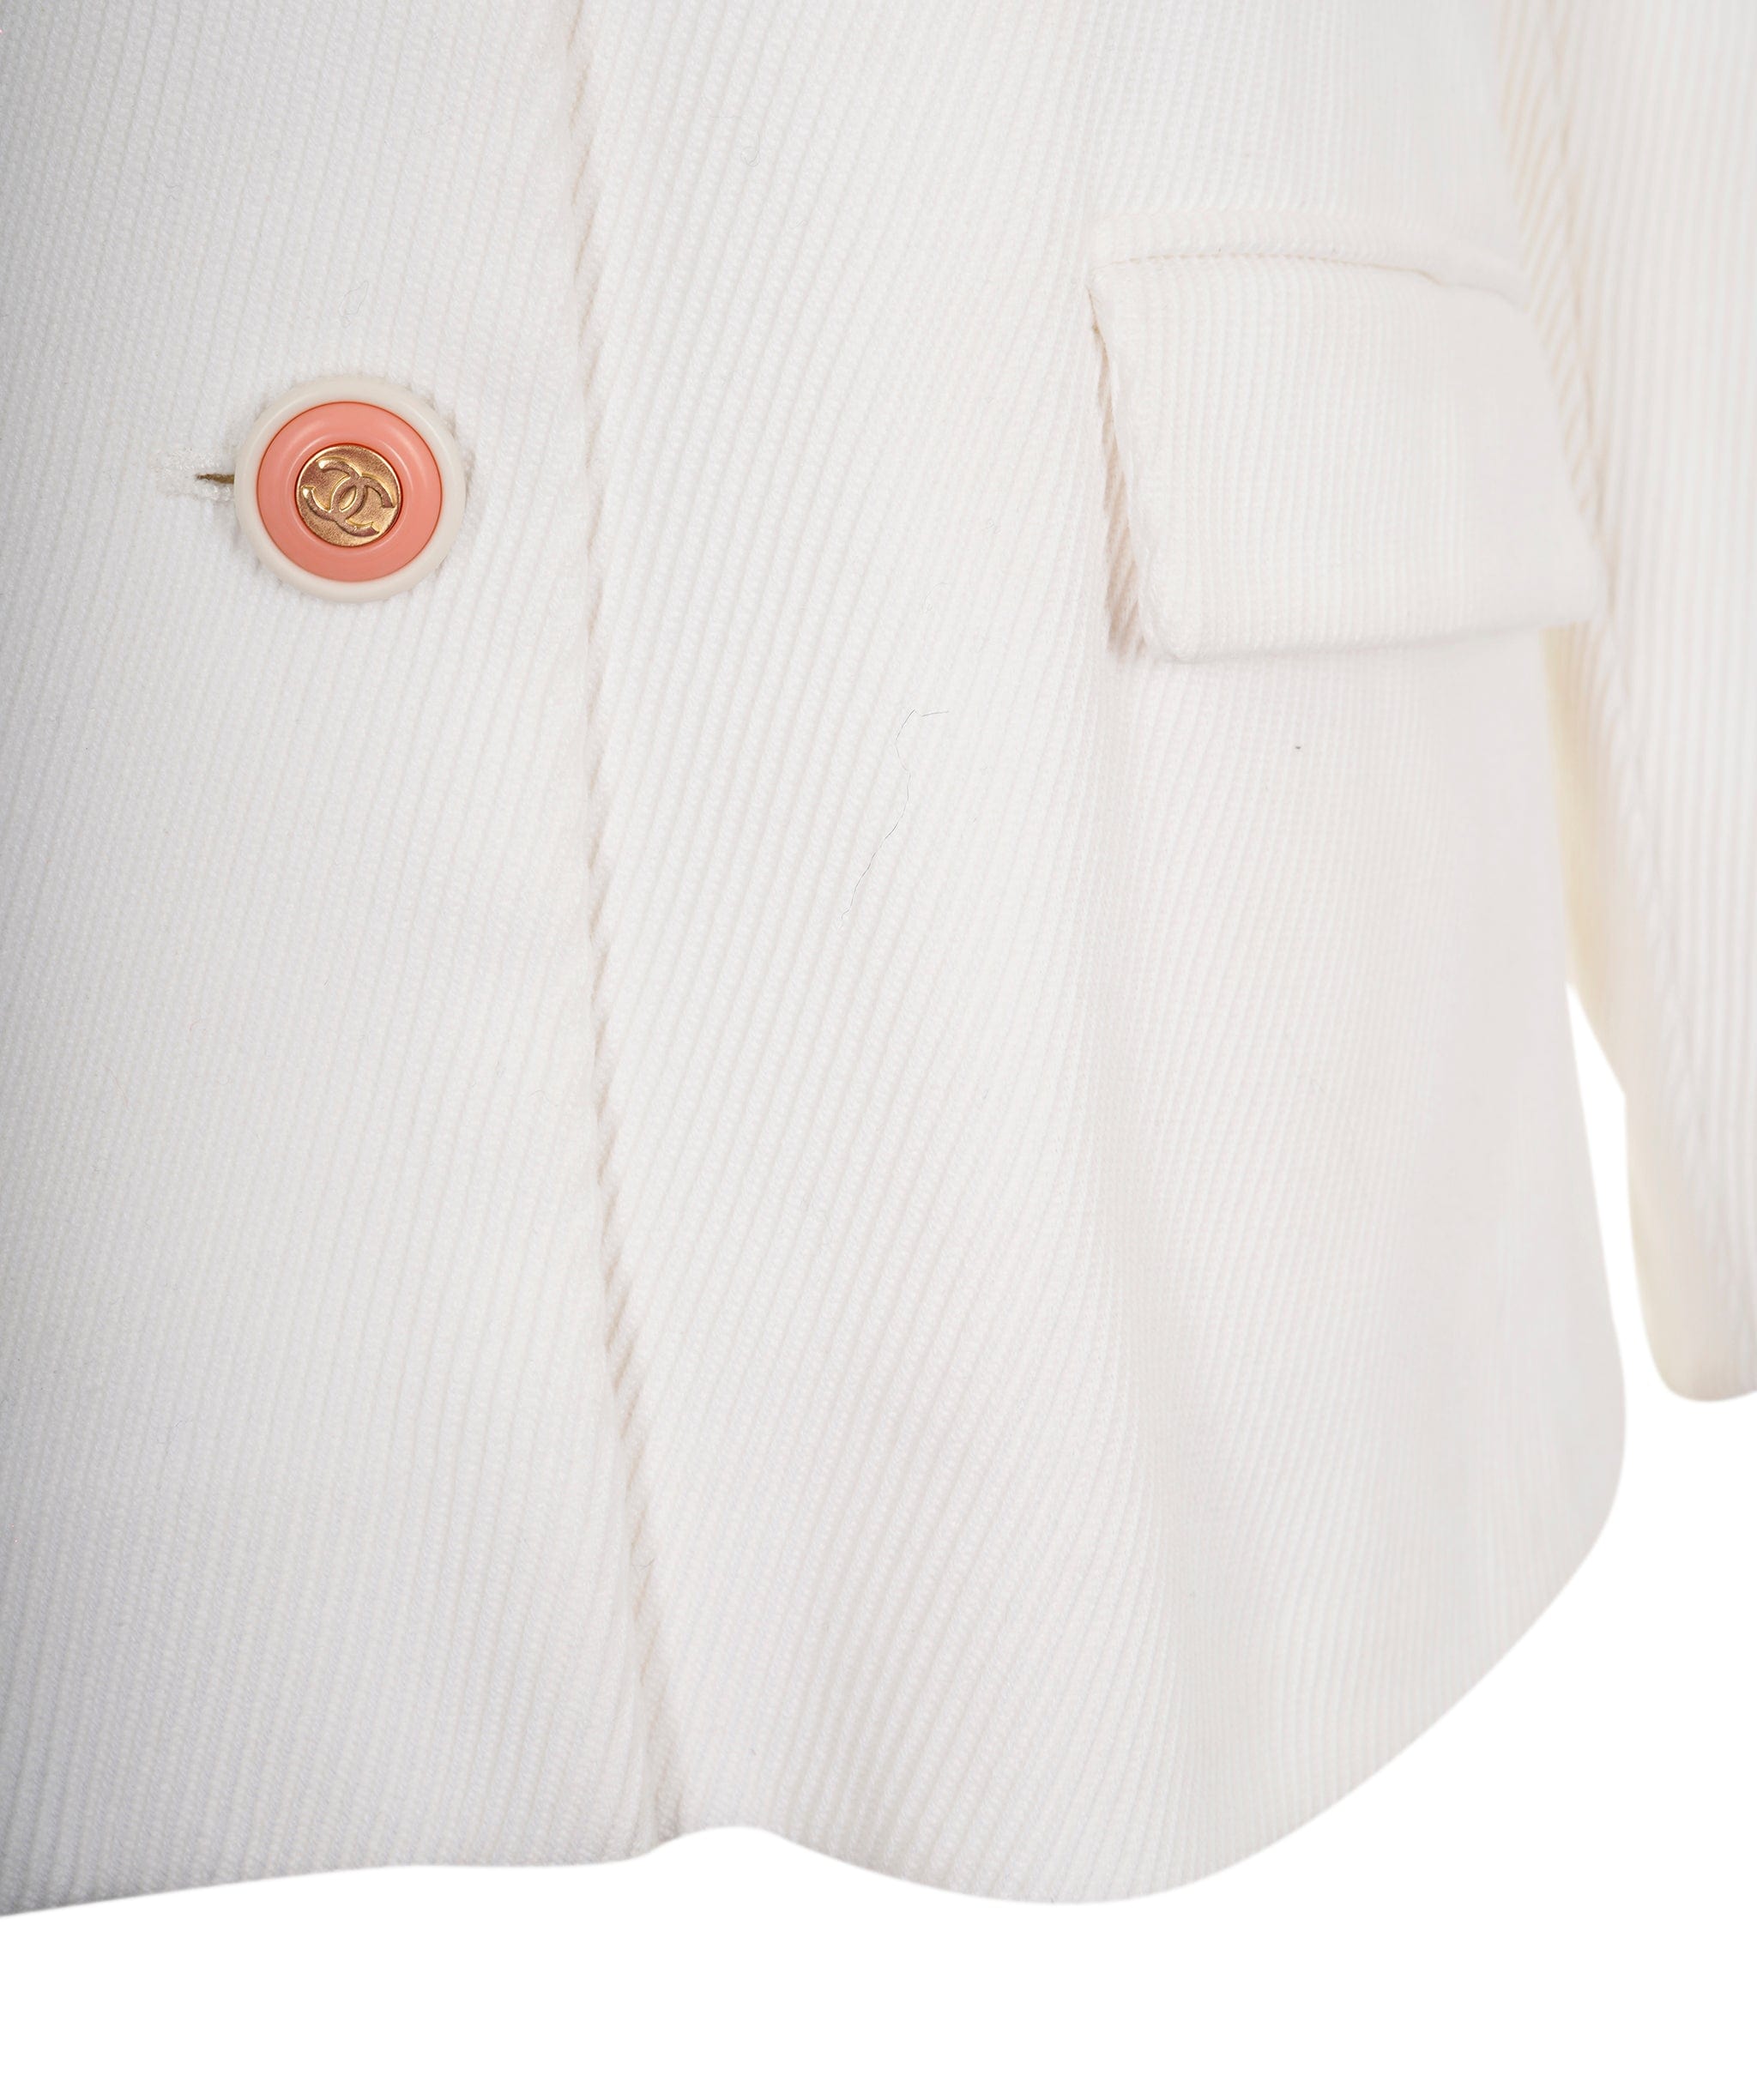 Chanel Chanel jacket white with pink and gold cc buttons AVC1308